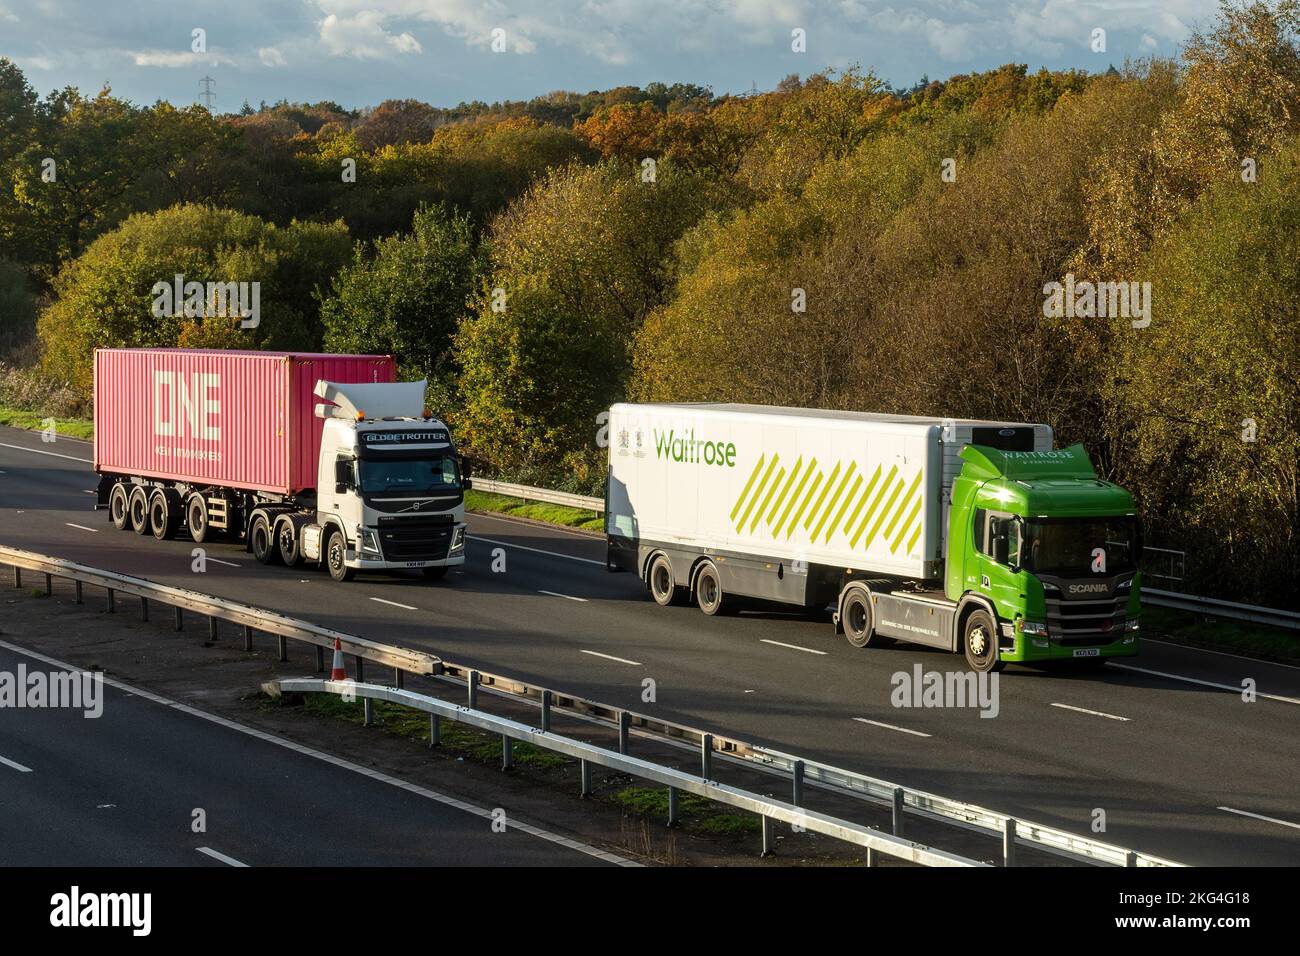 Two HGVs, Waitrose and One (Ocean Network Express) lorries travelling along the M3 motorway, England, UK Stock Photo